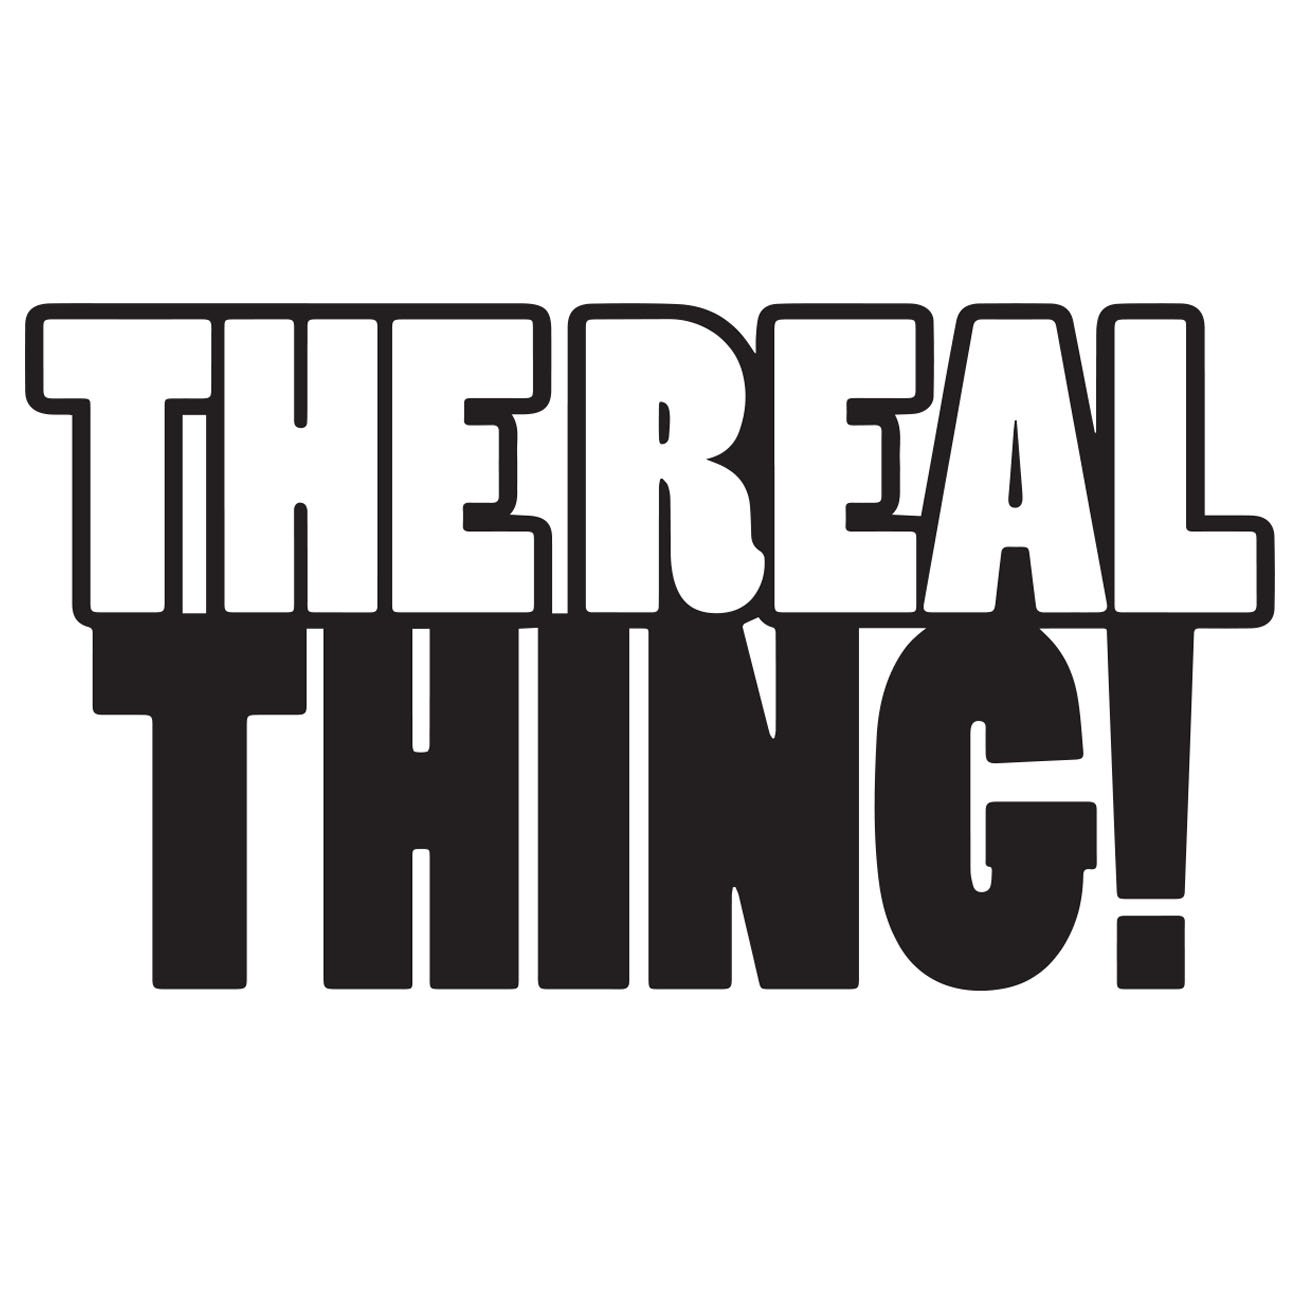 The real thing